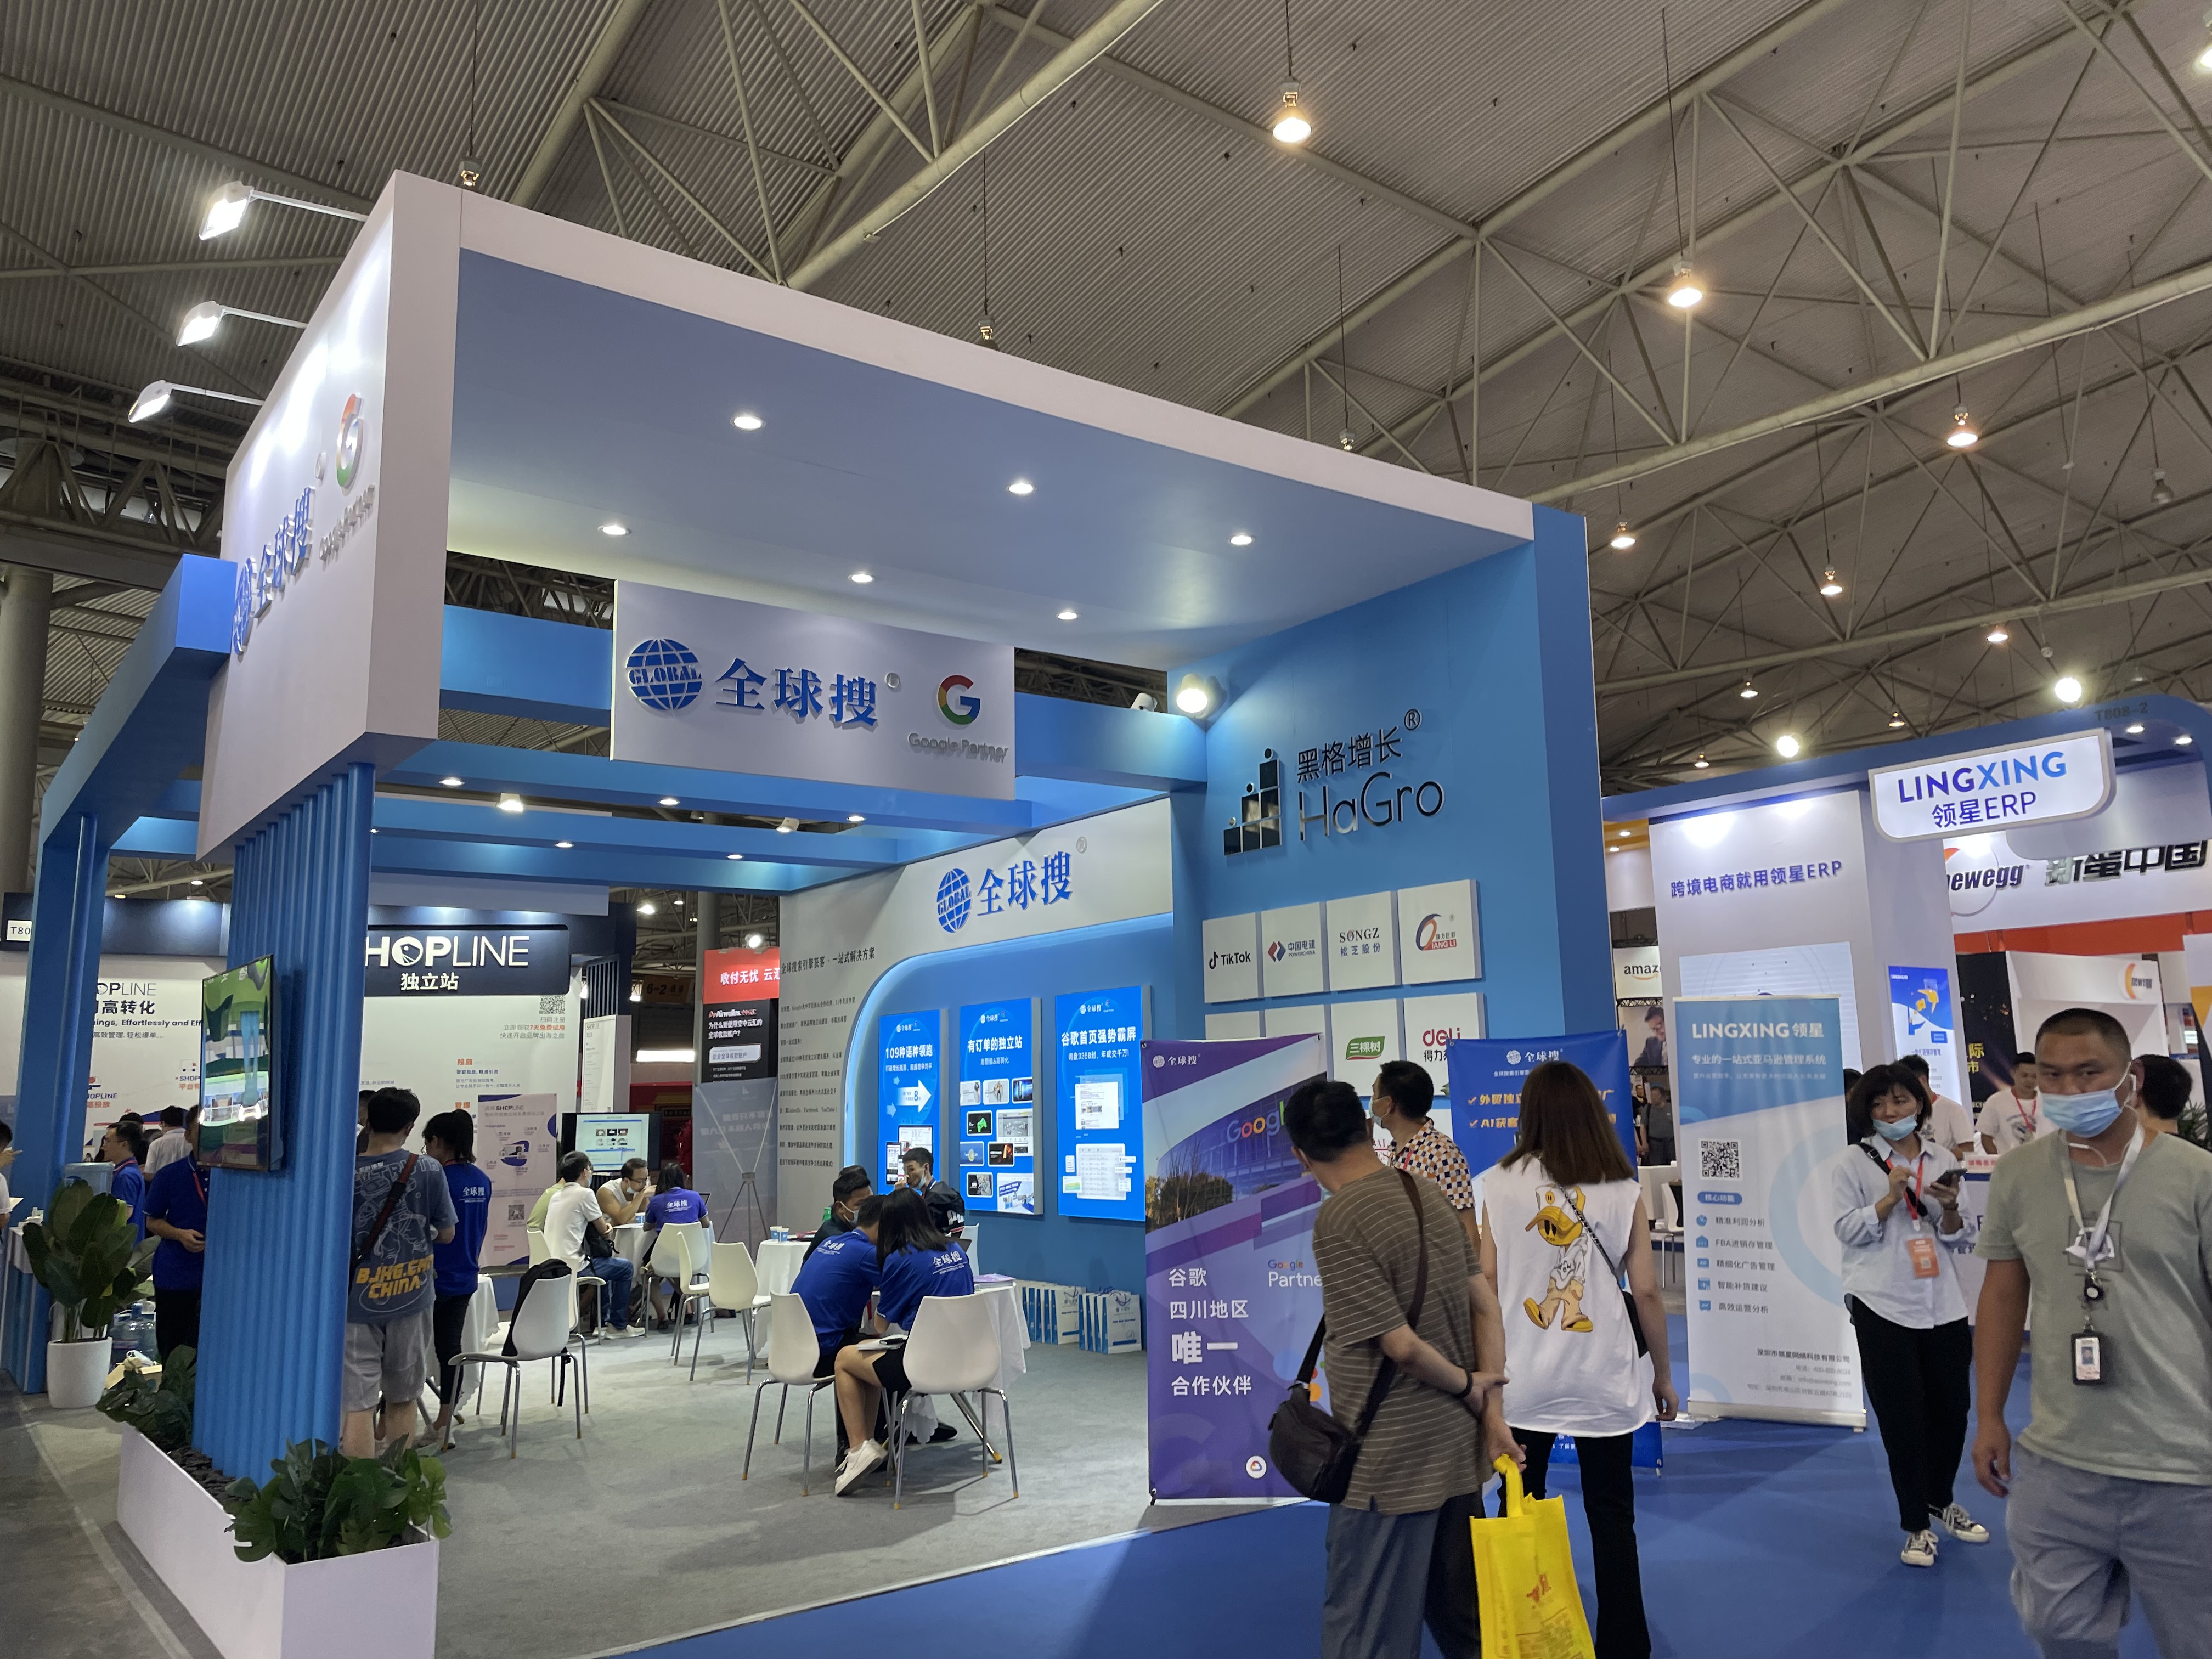 Congratulations on the successful holding of the cross-border e-commerce exhibition in Chengdu